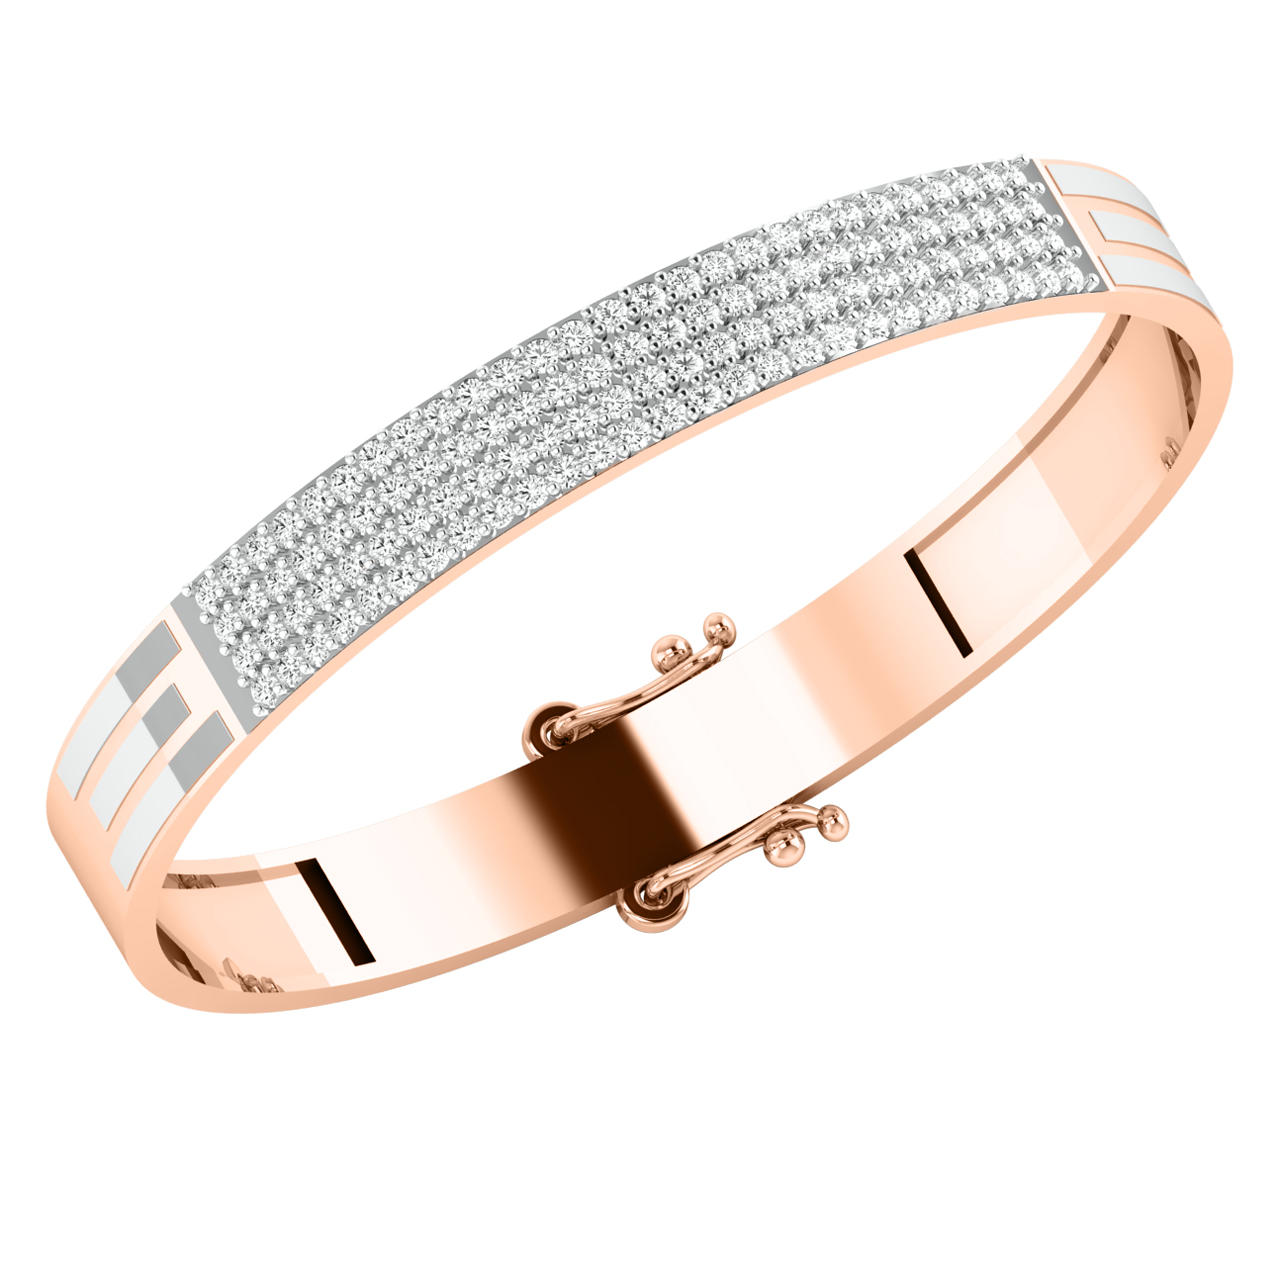 Buy RoseGold Daimond Bracelet For Women Online In India At Discounted Prices